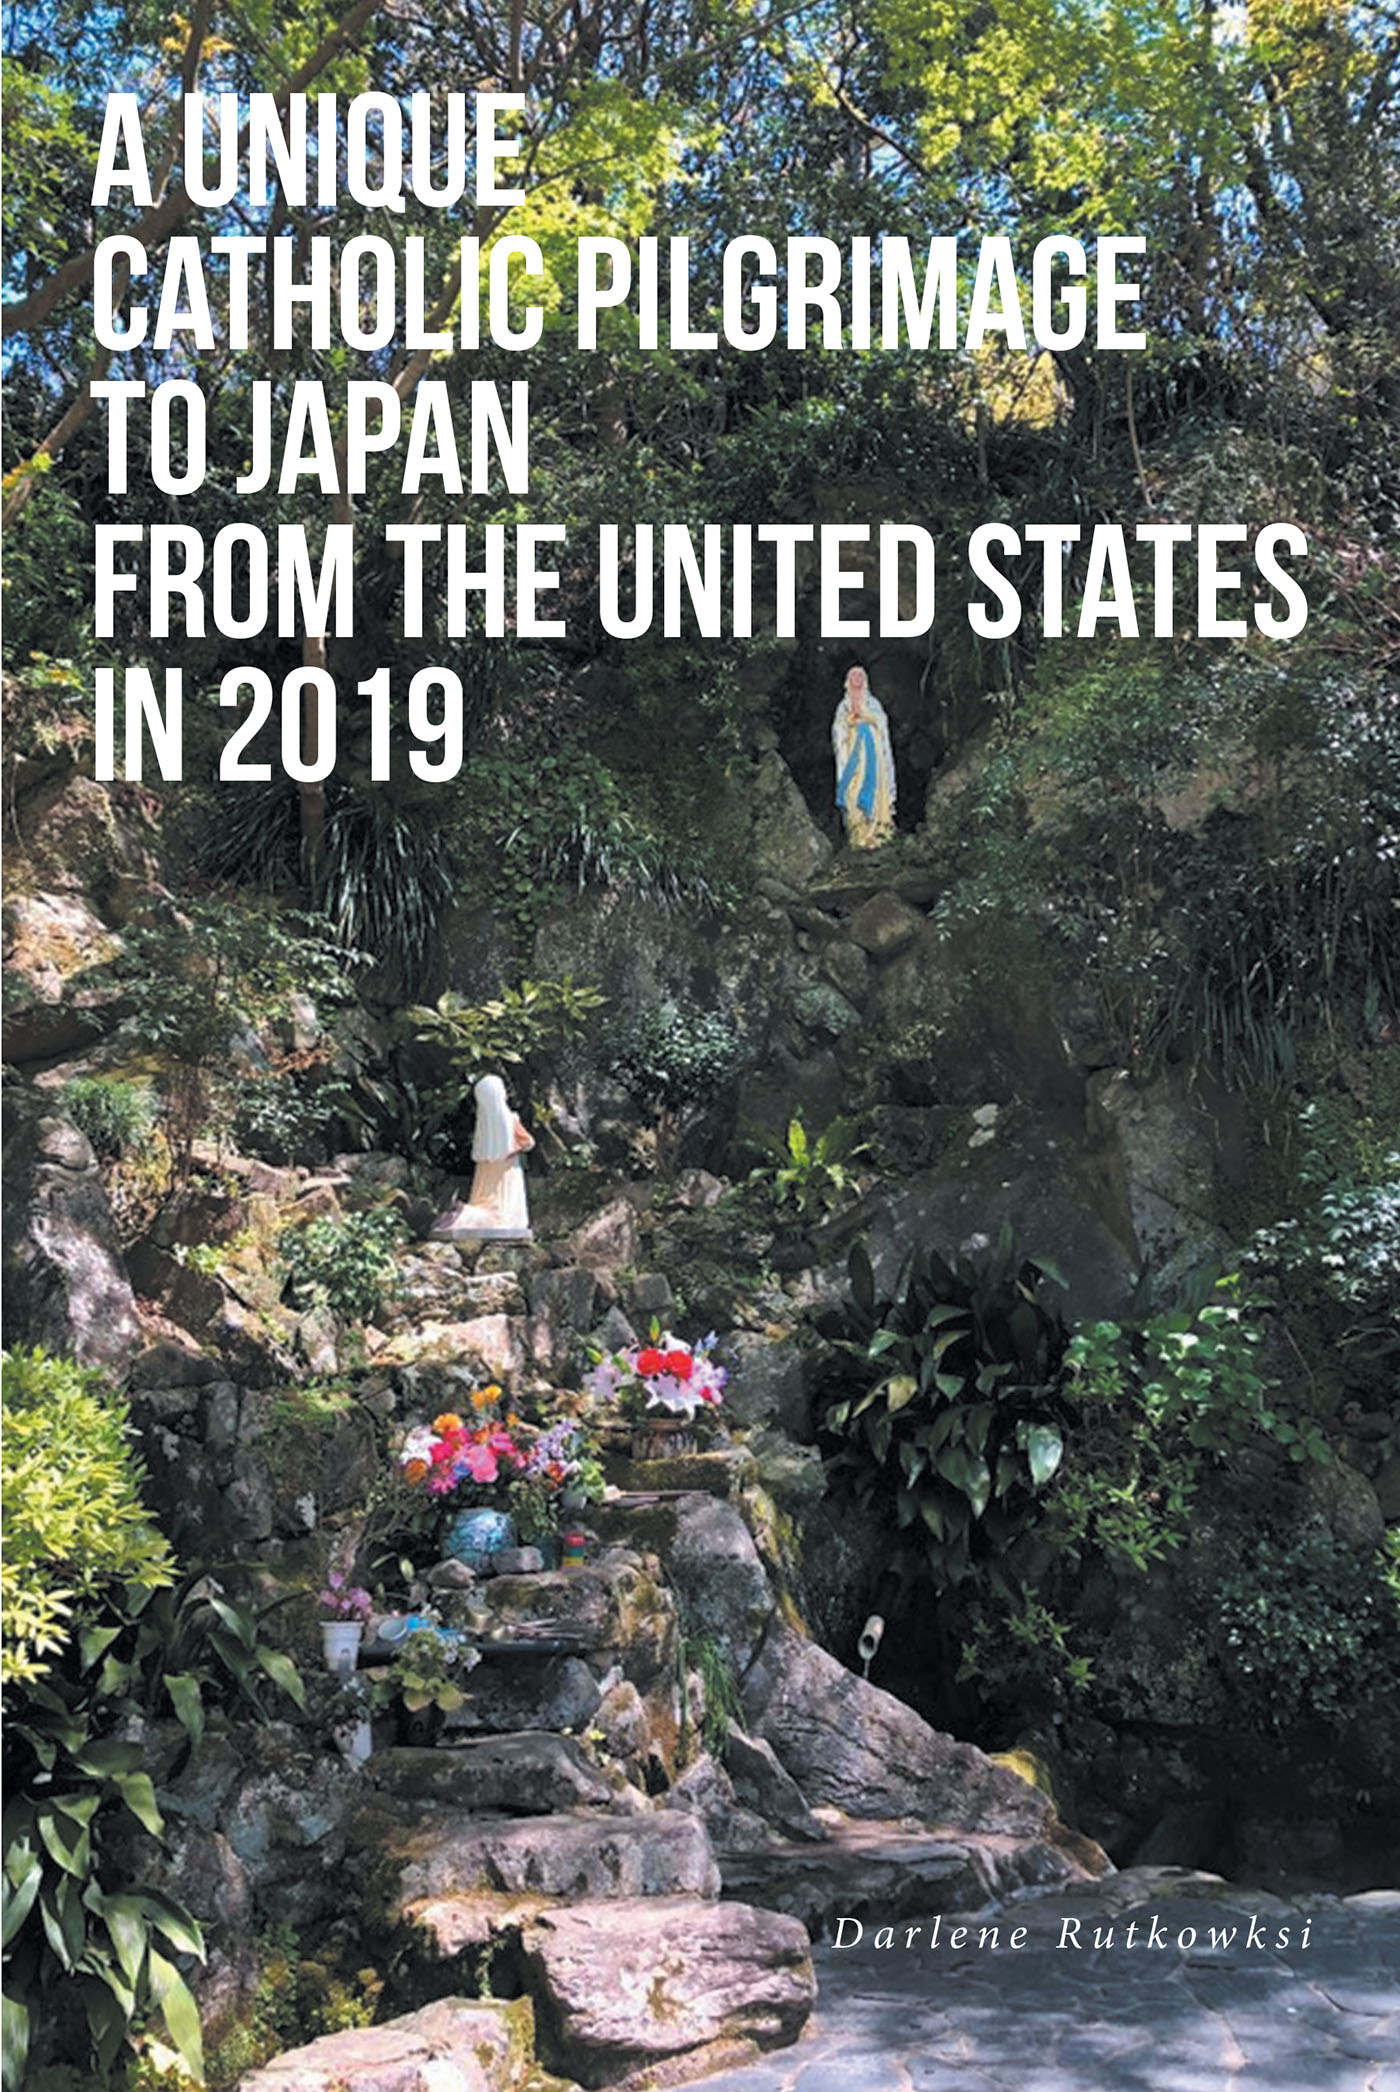 Author Darlene Rutkowksi’s New Book “A Unique Catholic Pilgrimage to Japan from the United States in 2019” Follows the Author Through an Incredible Life-Changing Journey